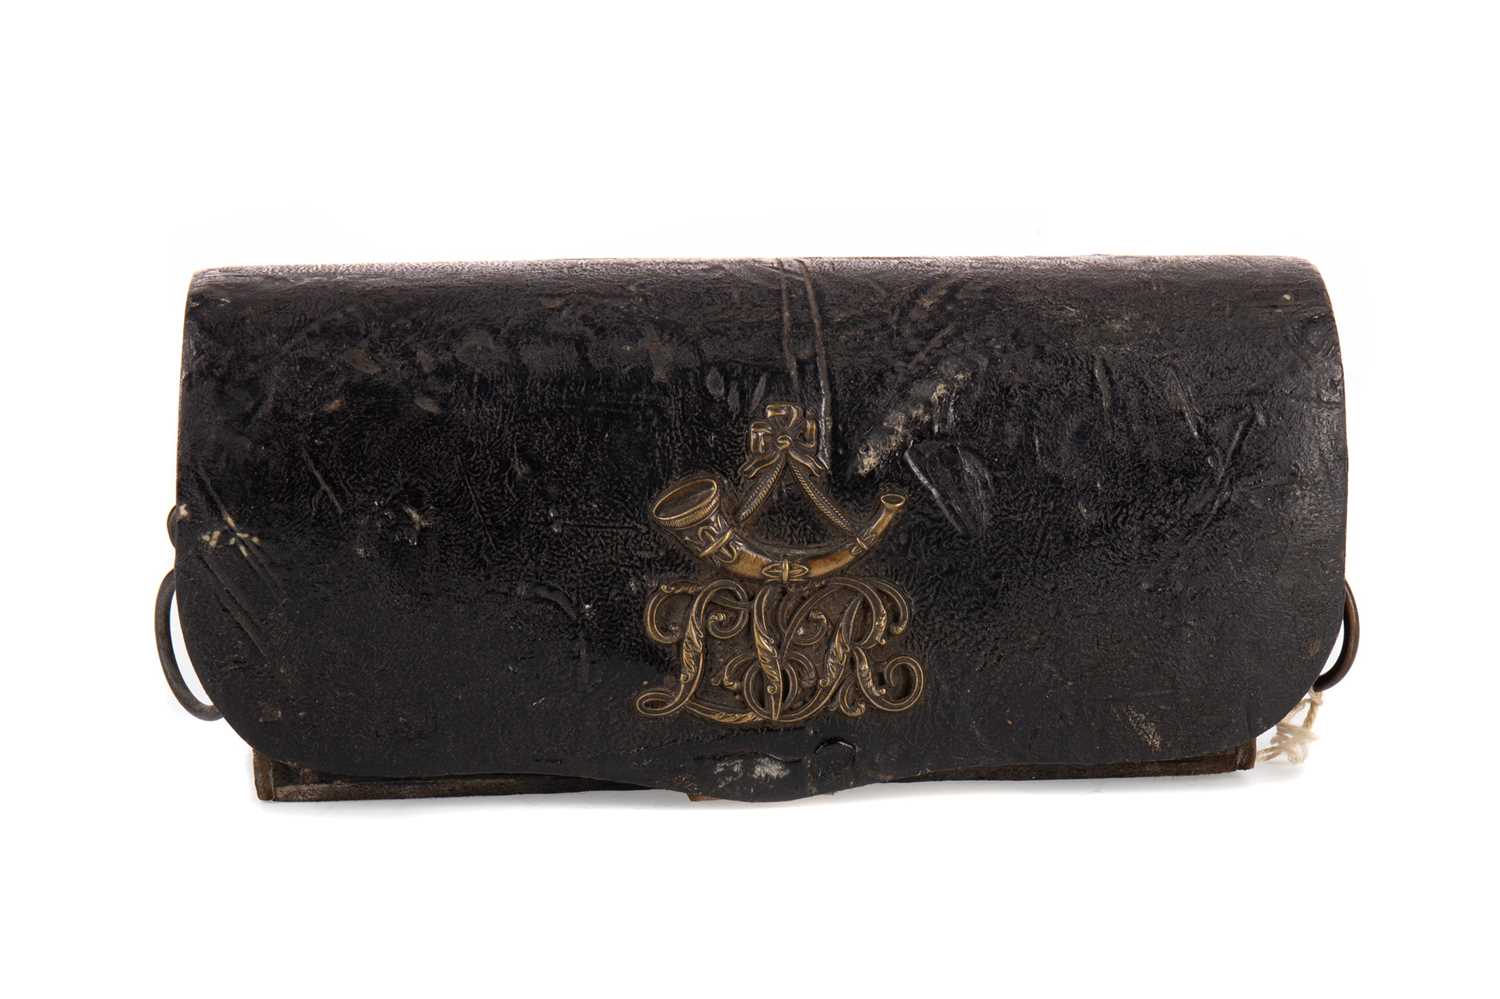 Lot 16 - A LATE 19TH/EARLY 20TH CENTURY LEATHER CASED AMMUNITION POUCH